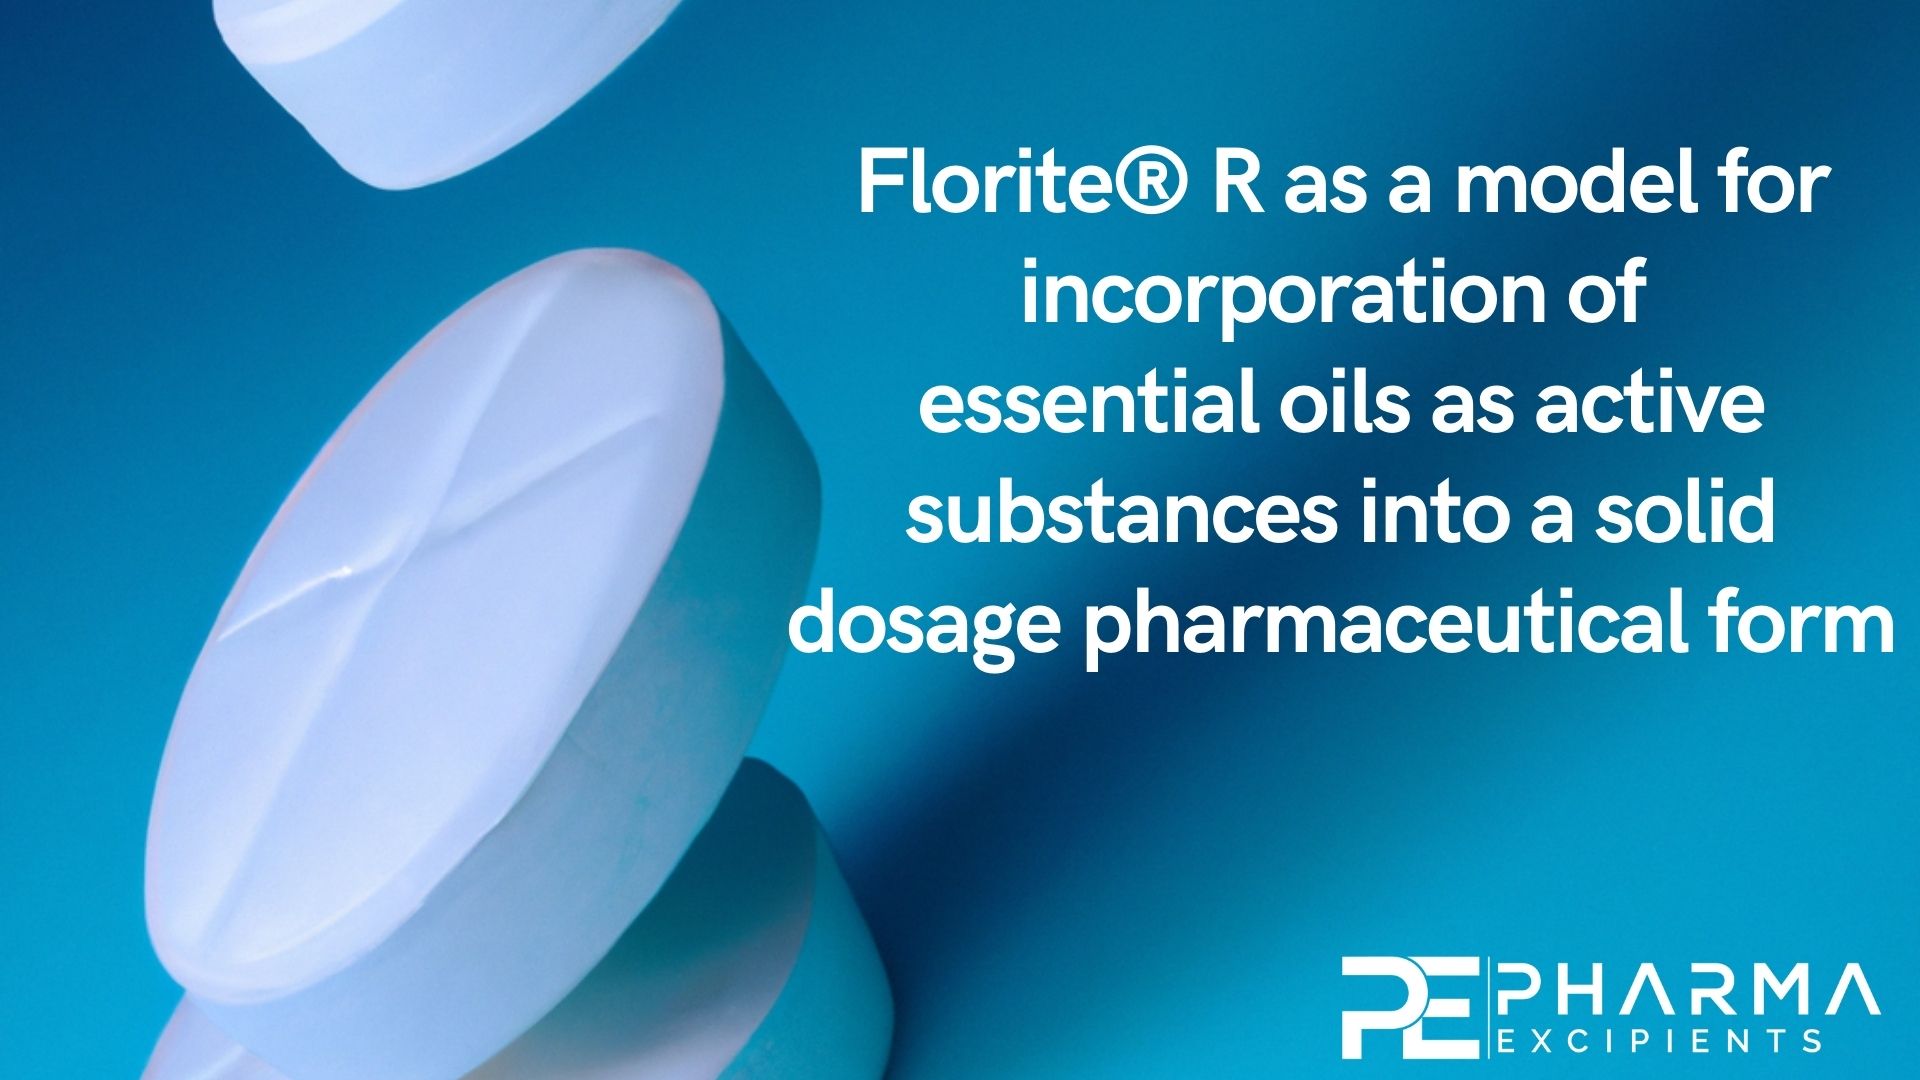 Florite® R as a model for incorporation of essential oils as active substances into a solid dosage pharmaceutical form